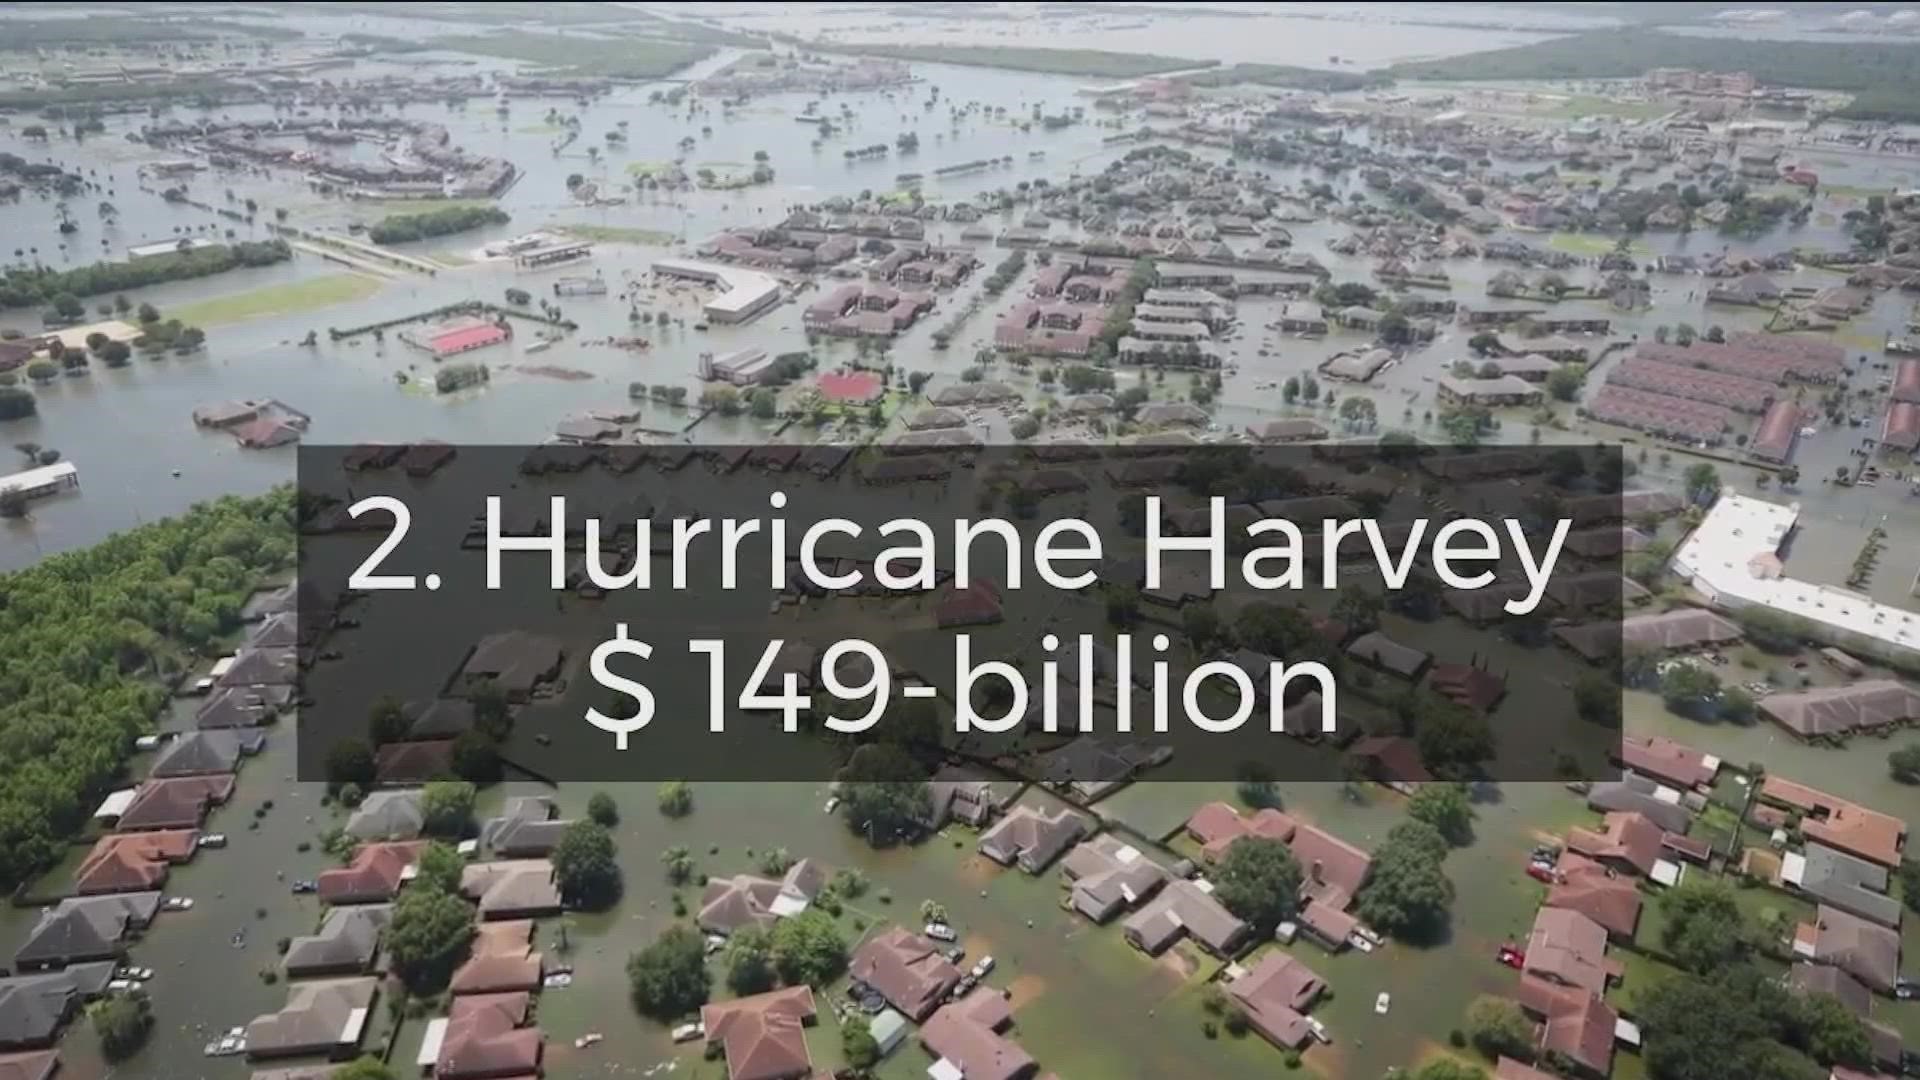 The property damage from hurricanes like Ian in 2022 continue to rise, with the costliest happening just in the past 20 years.